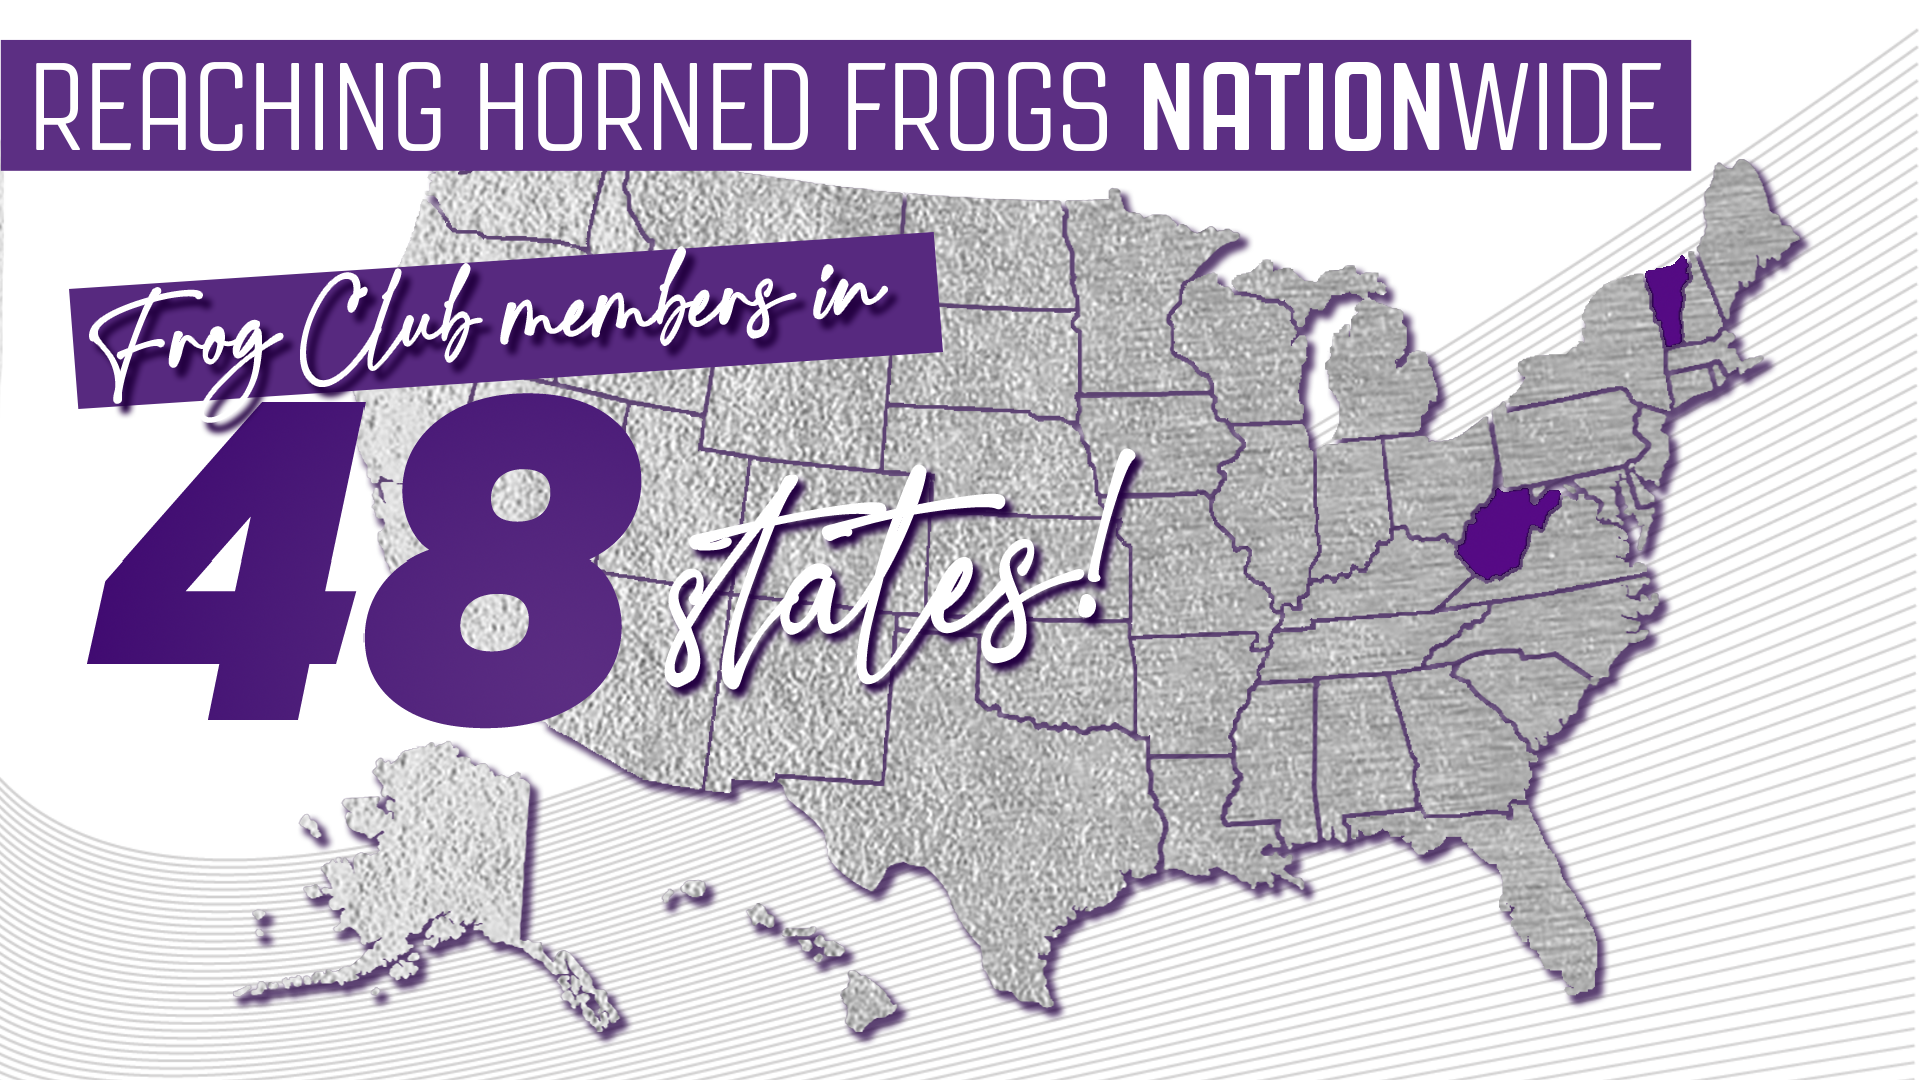 Reaching Horned Frogs Nationwide in 48 states!